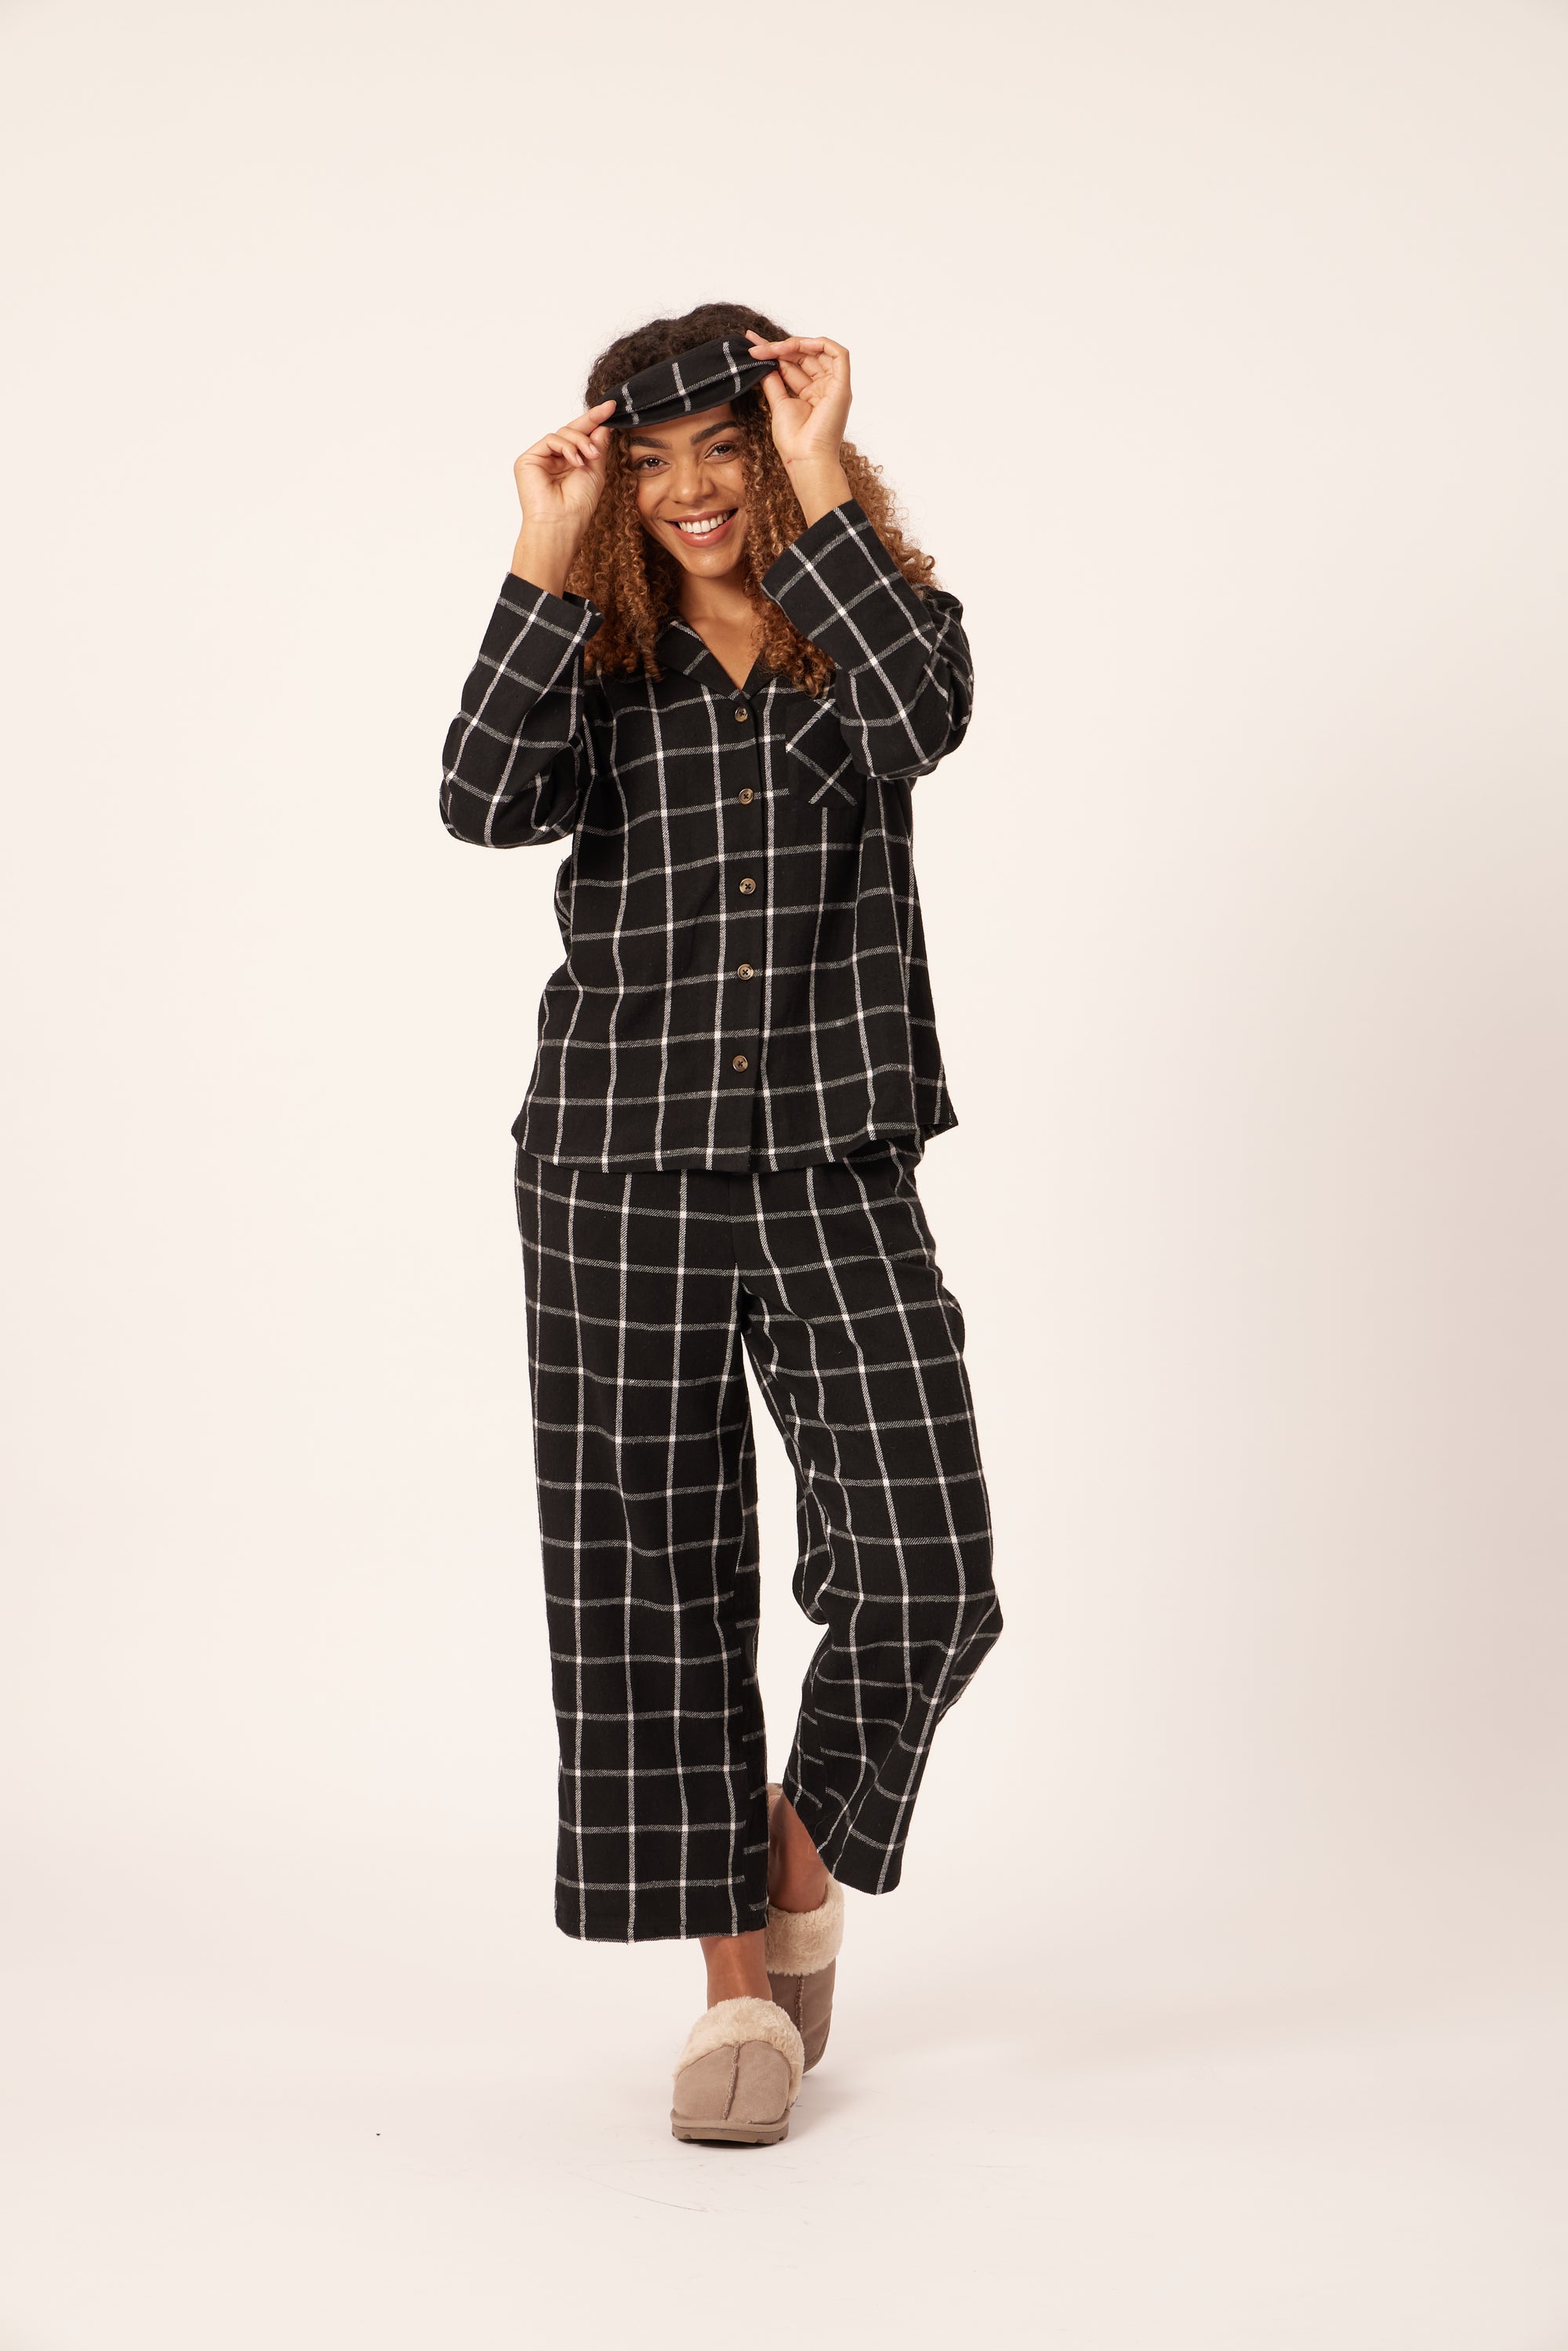 This Set is Woven Check Pyjama Ellie - Unfolded –